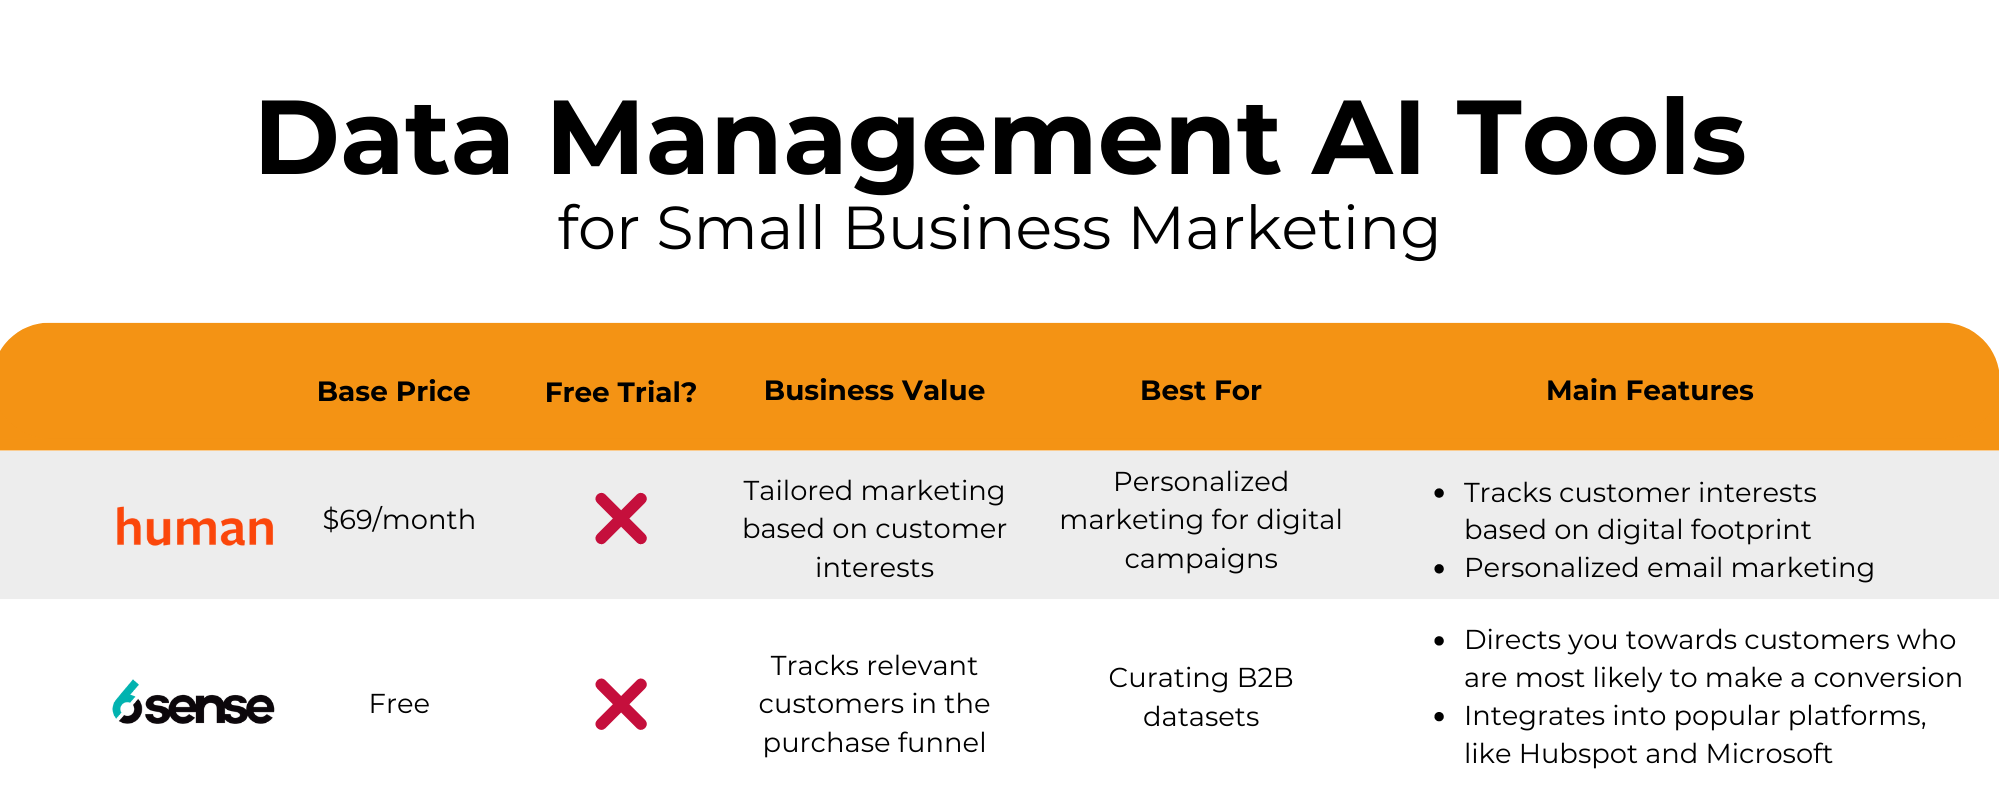 data management ai tool chart summary of best ones for small businesses